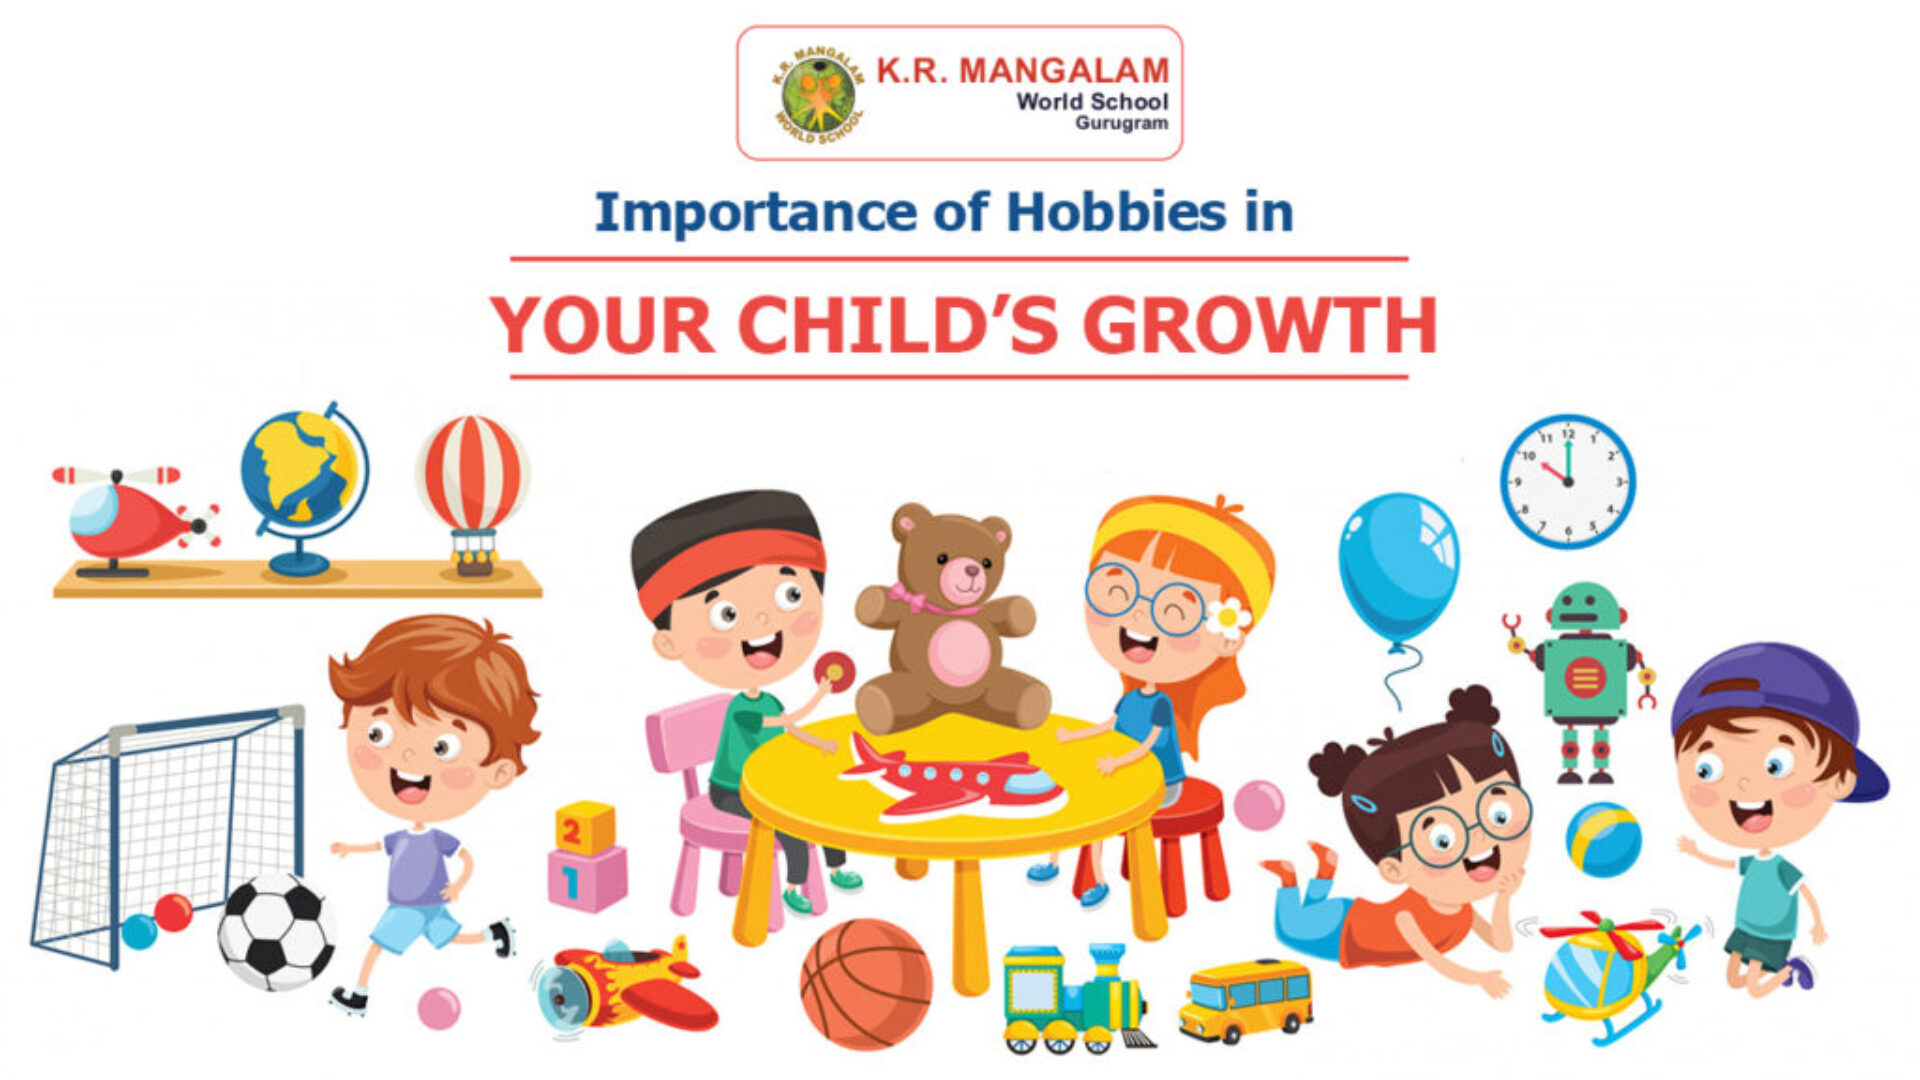 Importance of Hobbies in your Child’s Growth